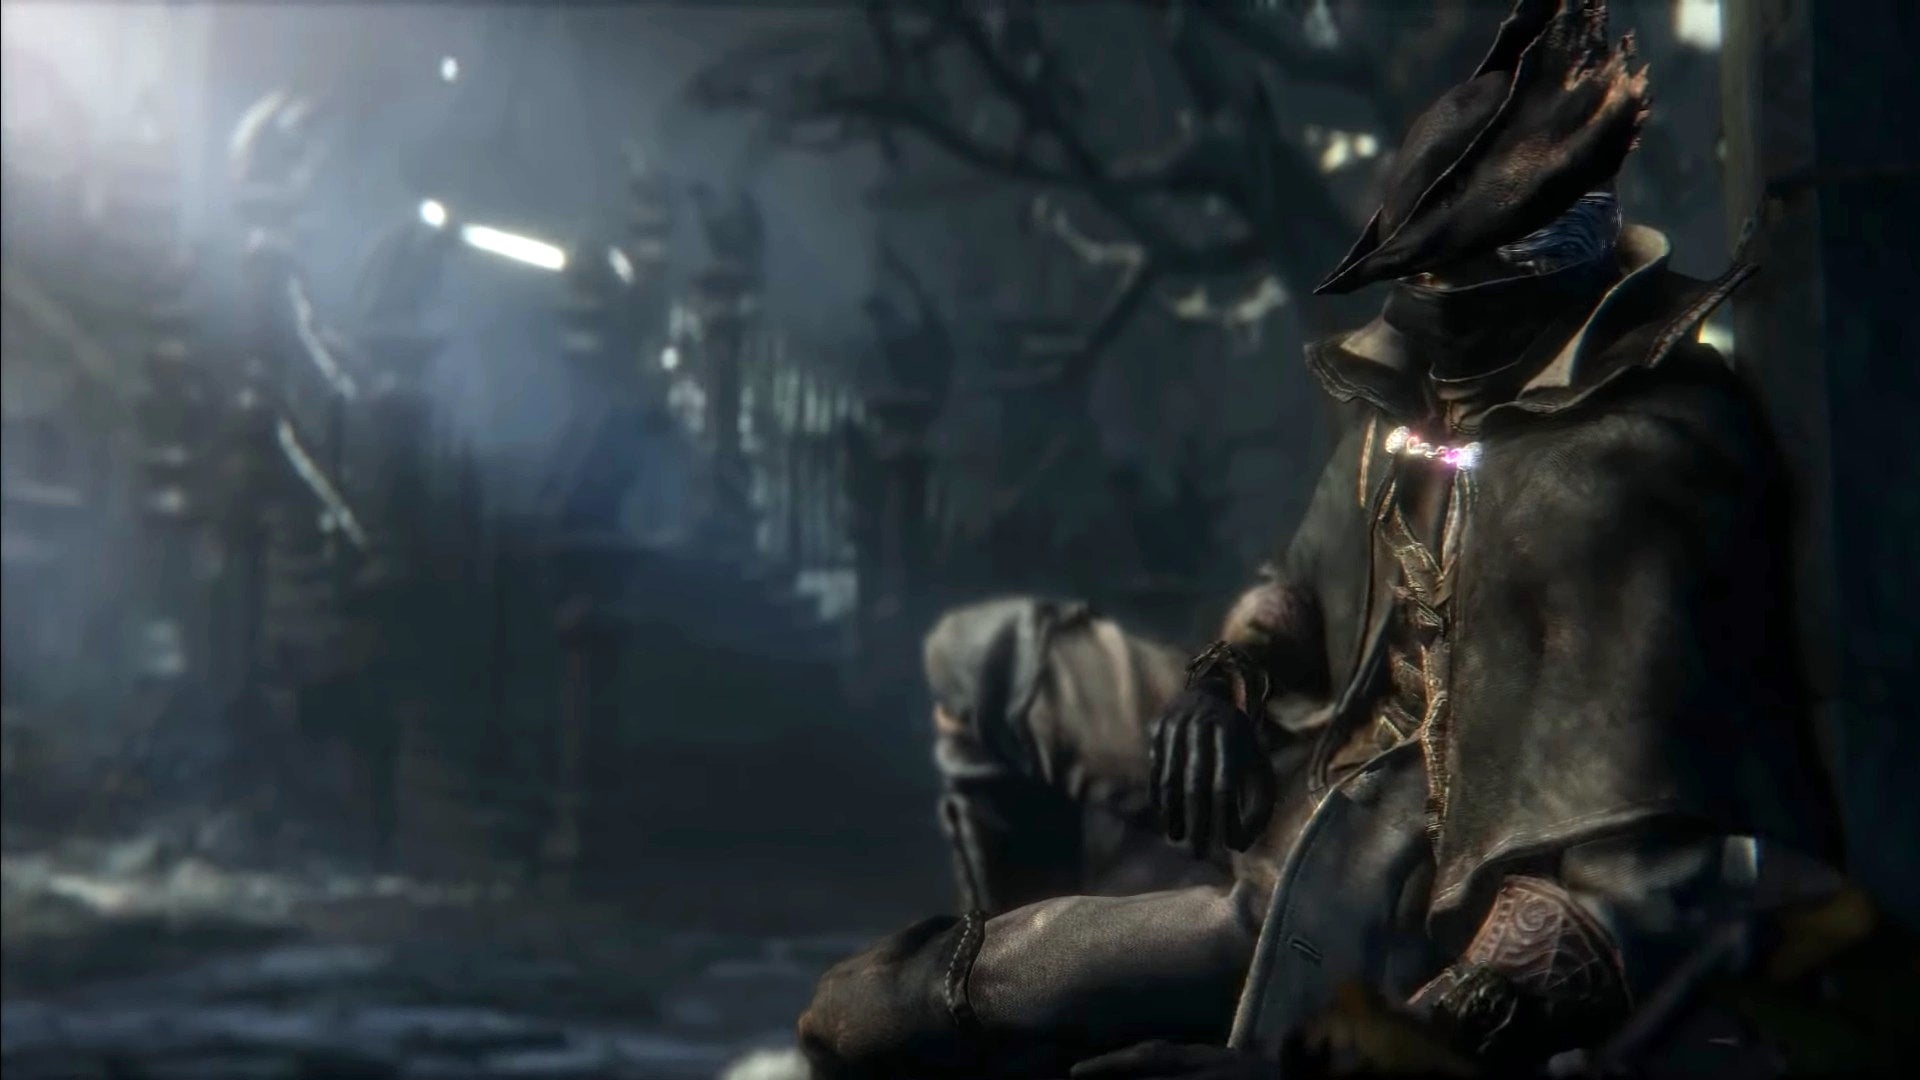 Fans just fell hard for fake Bloodborne remaster news - Xfire